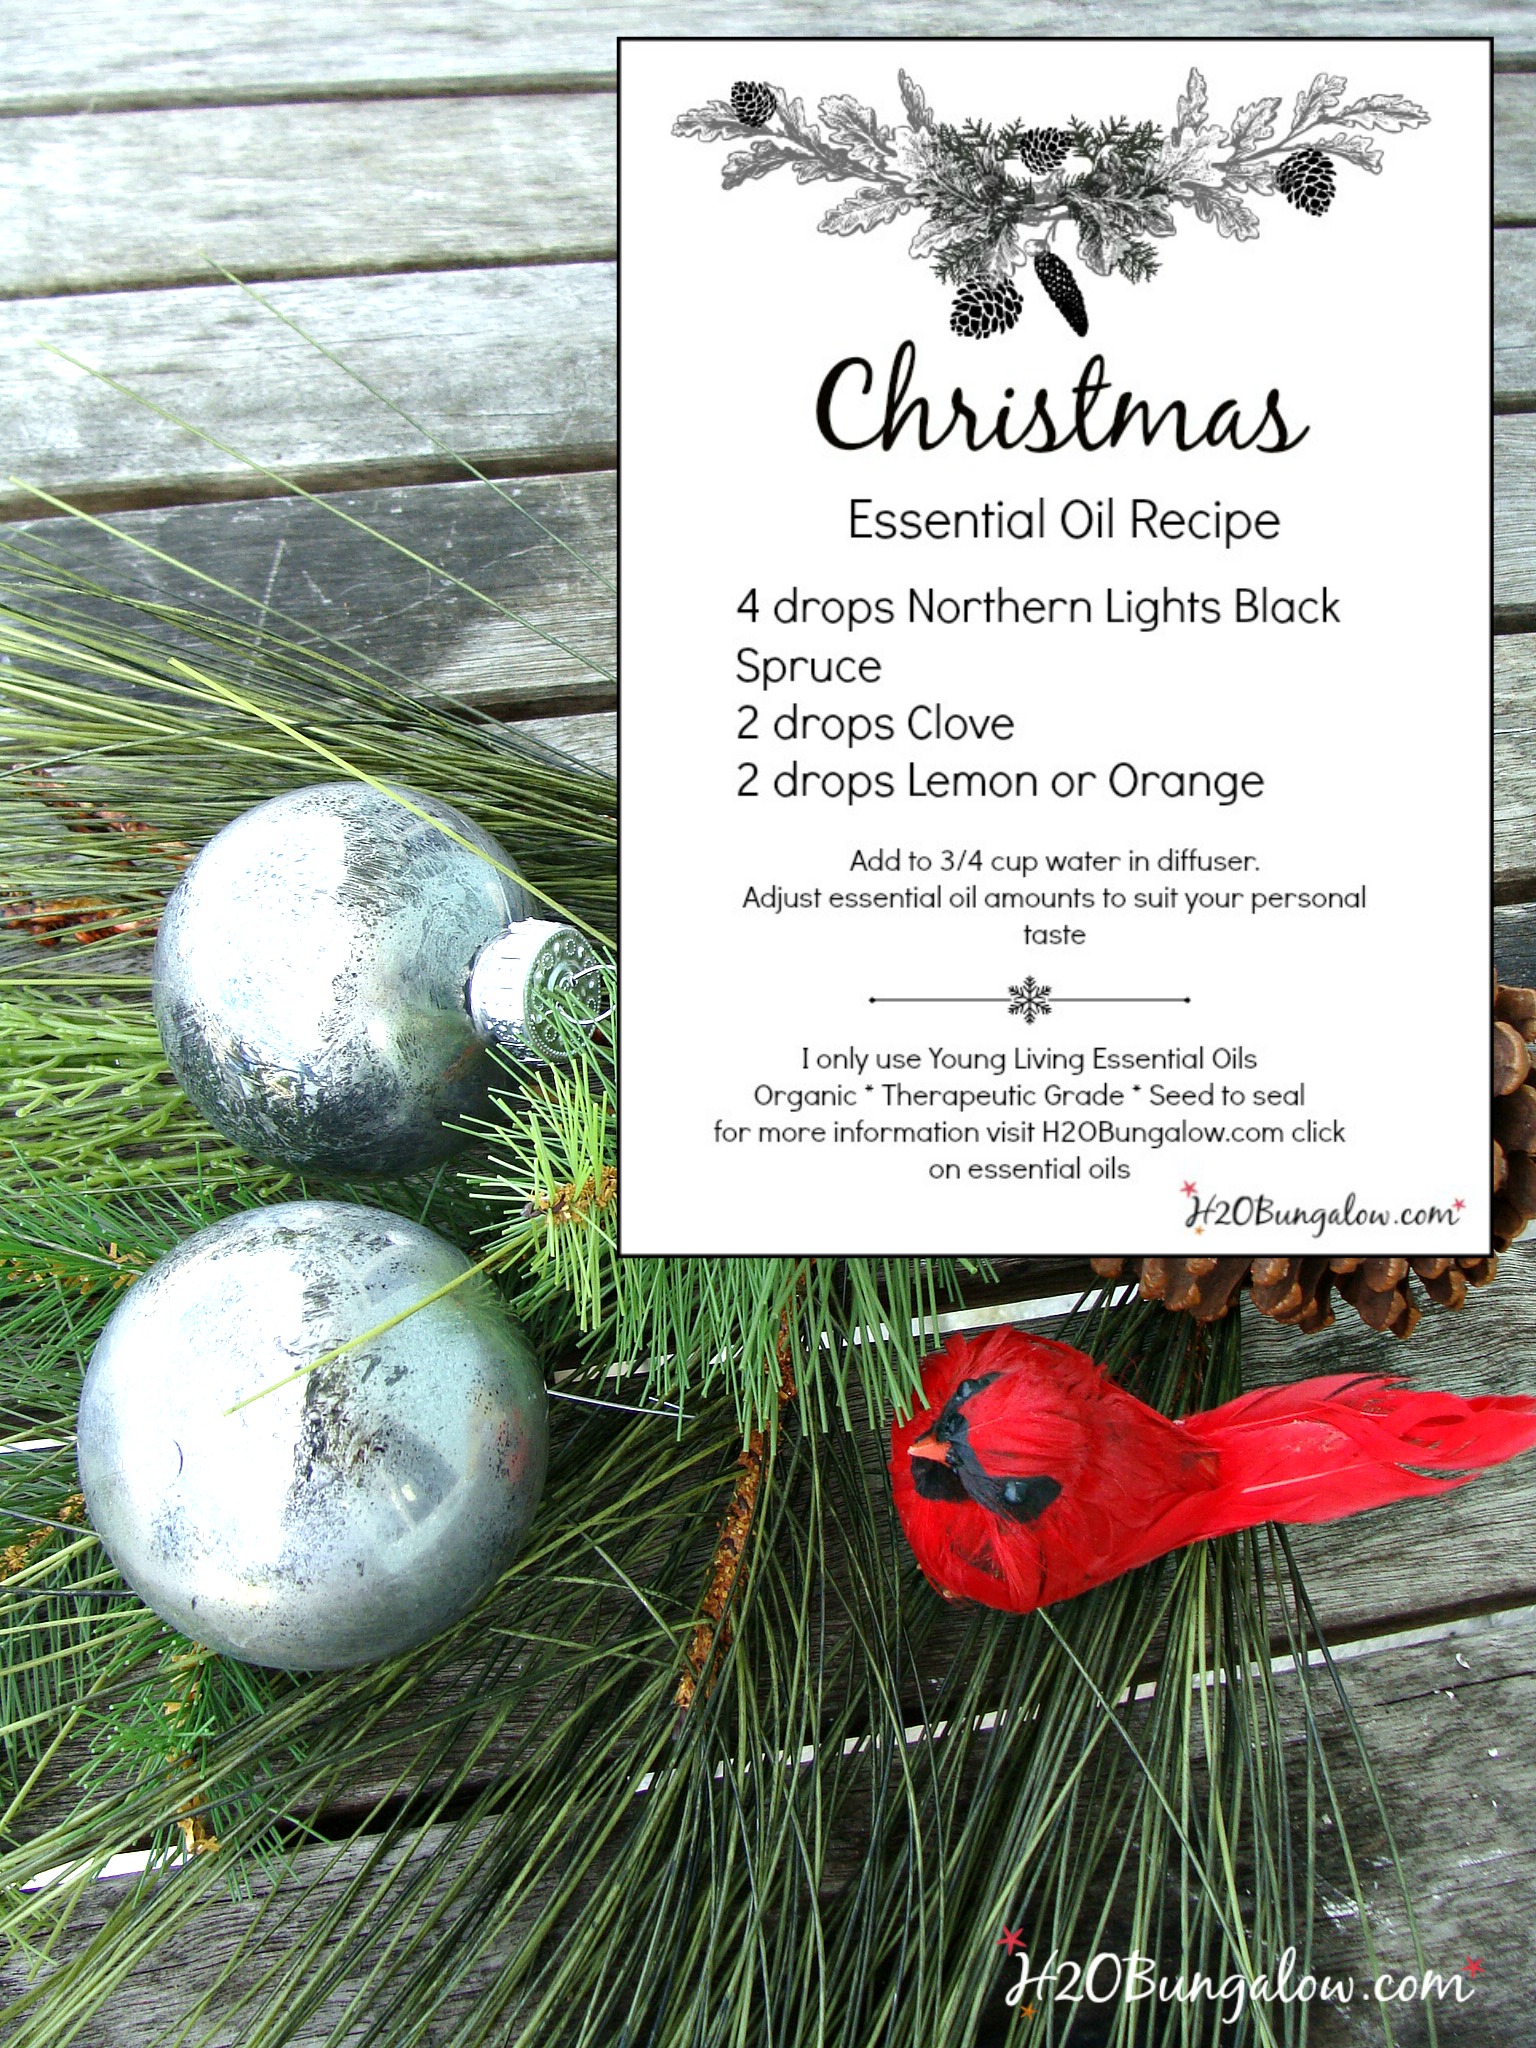 Christmas Essential Oil Recipe With Free Printable - H20Bungalow